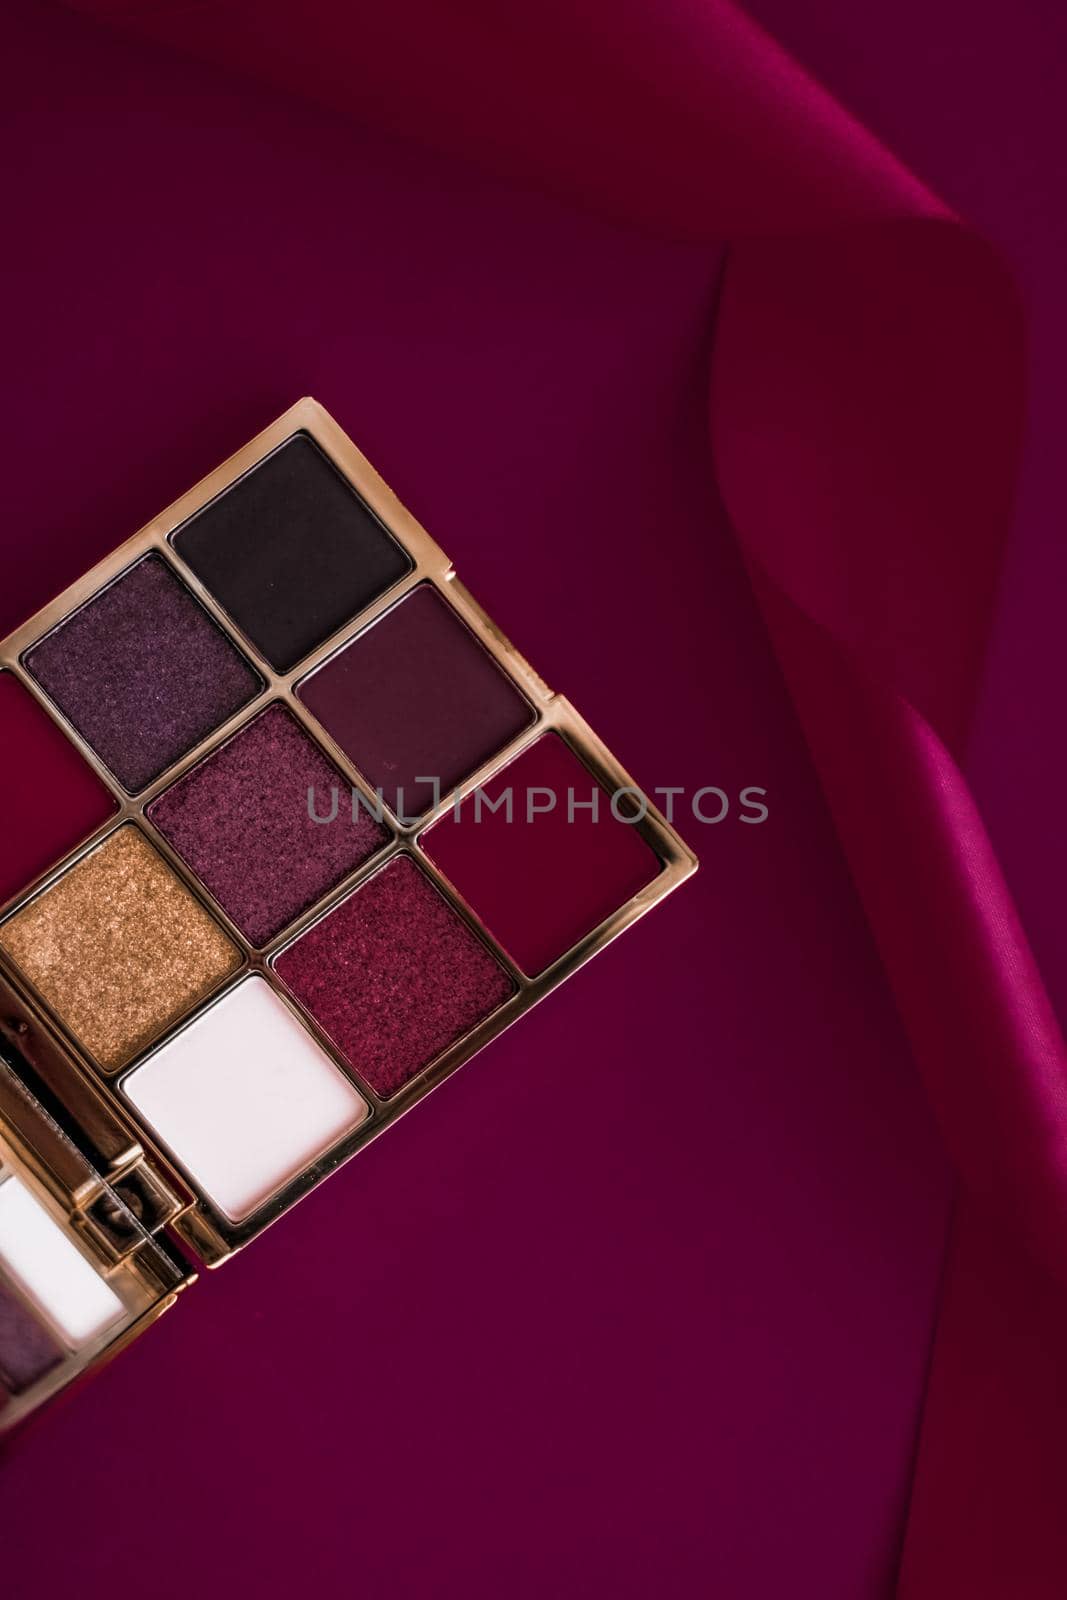 Eyeshadow palette and make-up brush on wine background, eye shadows cosmetics product for luxury beauty brand promotion and holiday fashion blog design by Anneleven